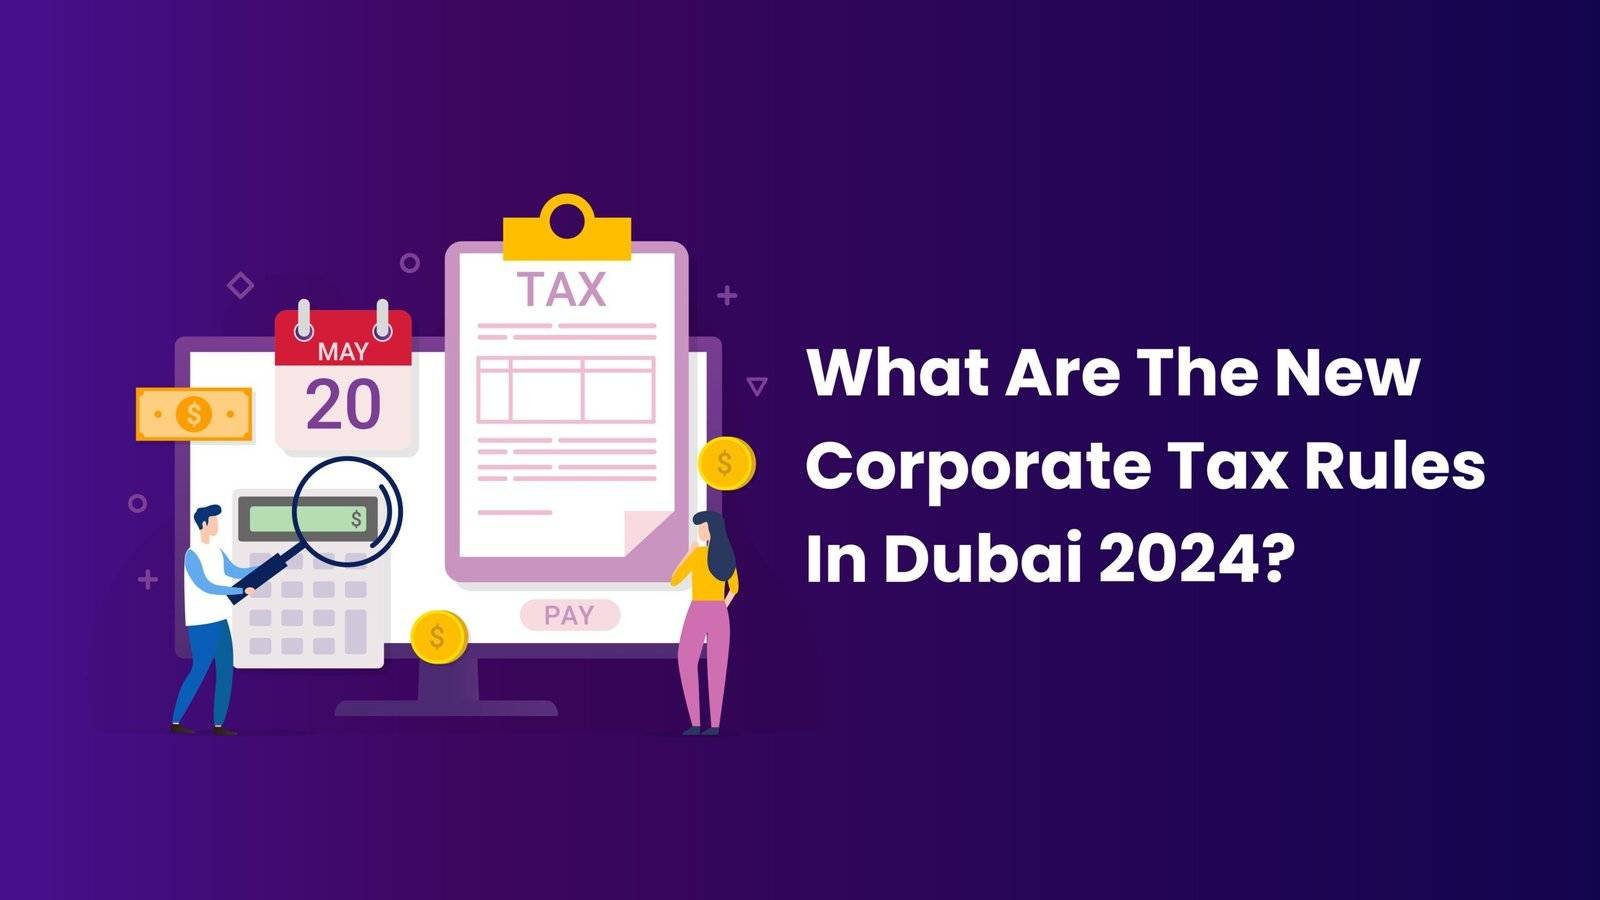 What Are The New Corporate Tax Rules In Dubai 2024?